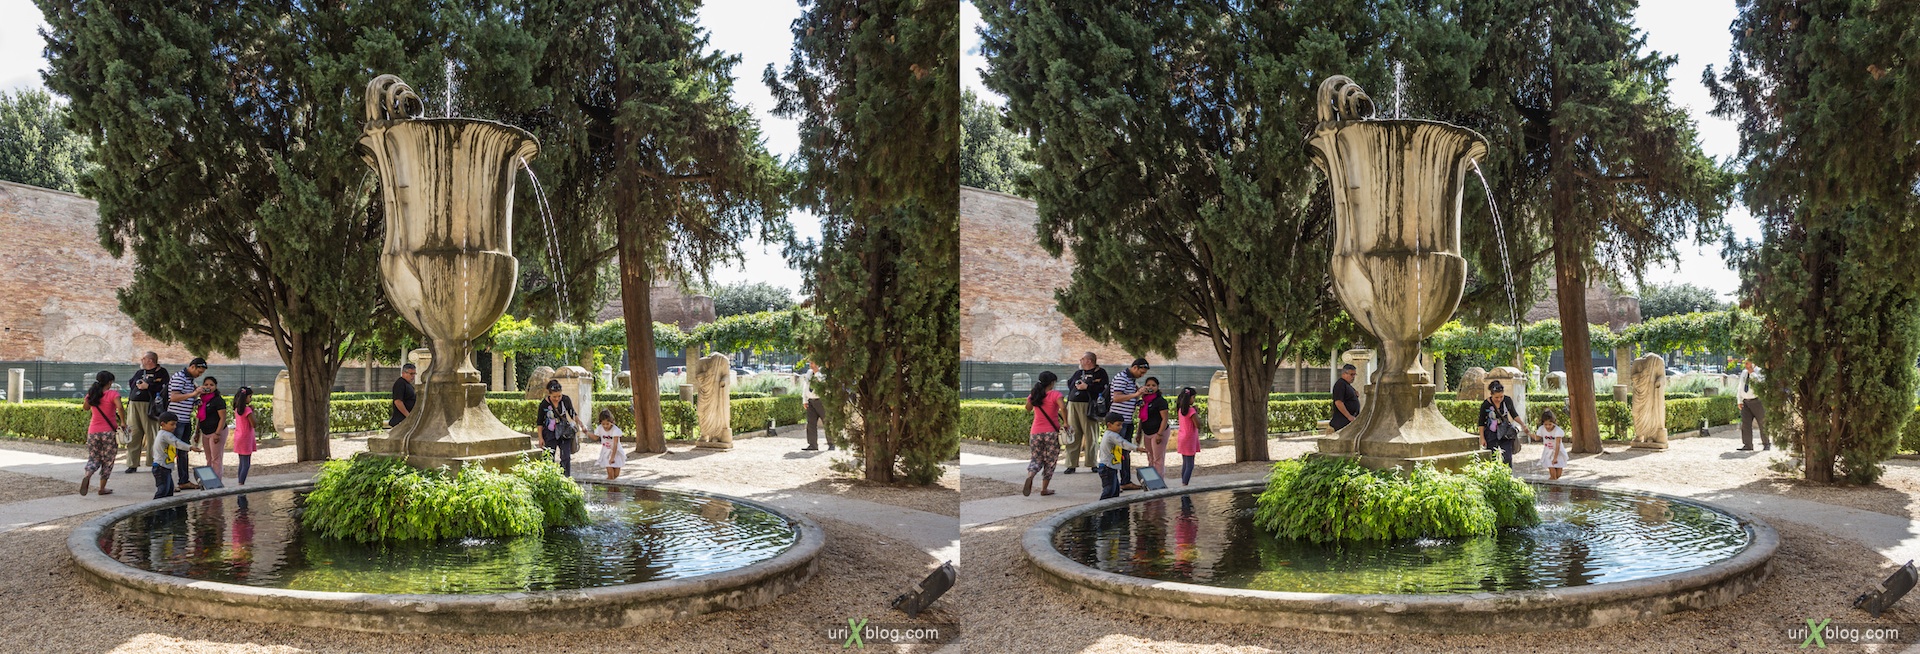 2012, fountain, National Museum of Rome, Diocletian's Baths, Rome, Italy, 3D, stereo pair, cross-eyed, crossview, cross view stereo pair